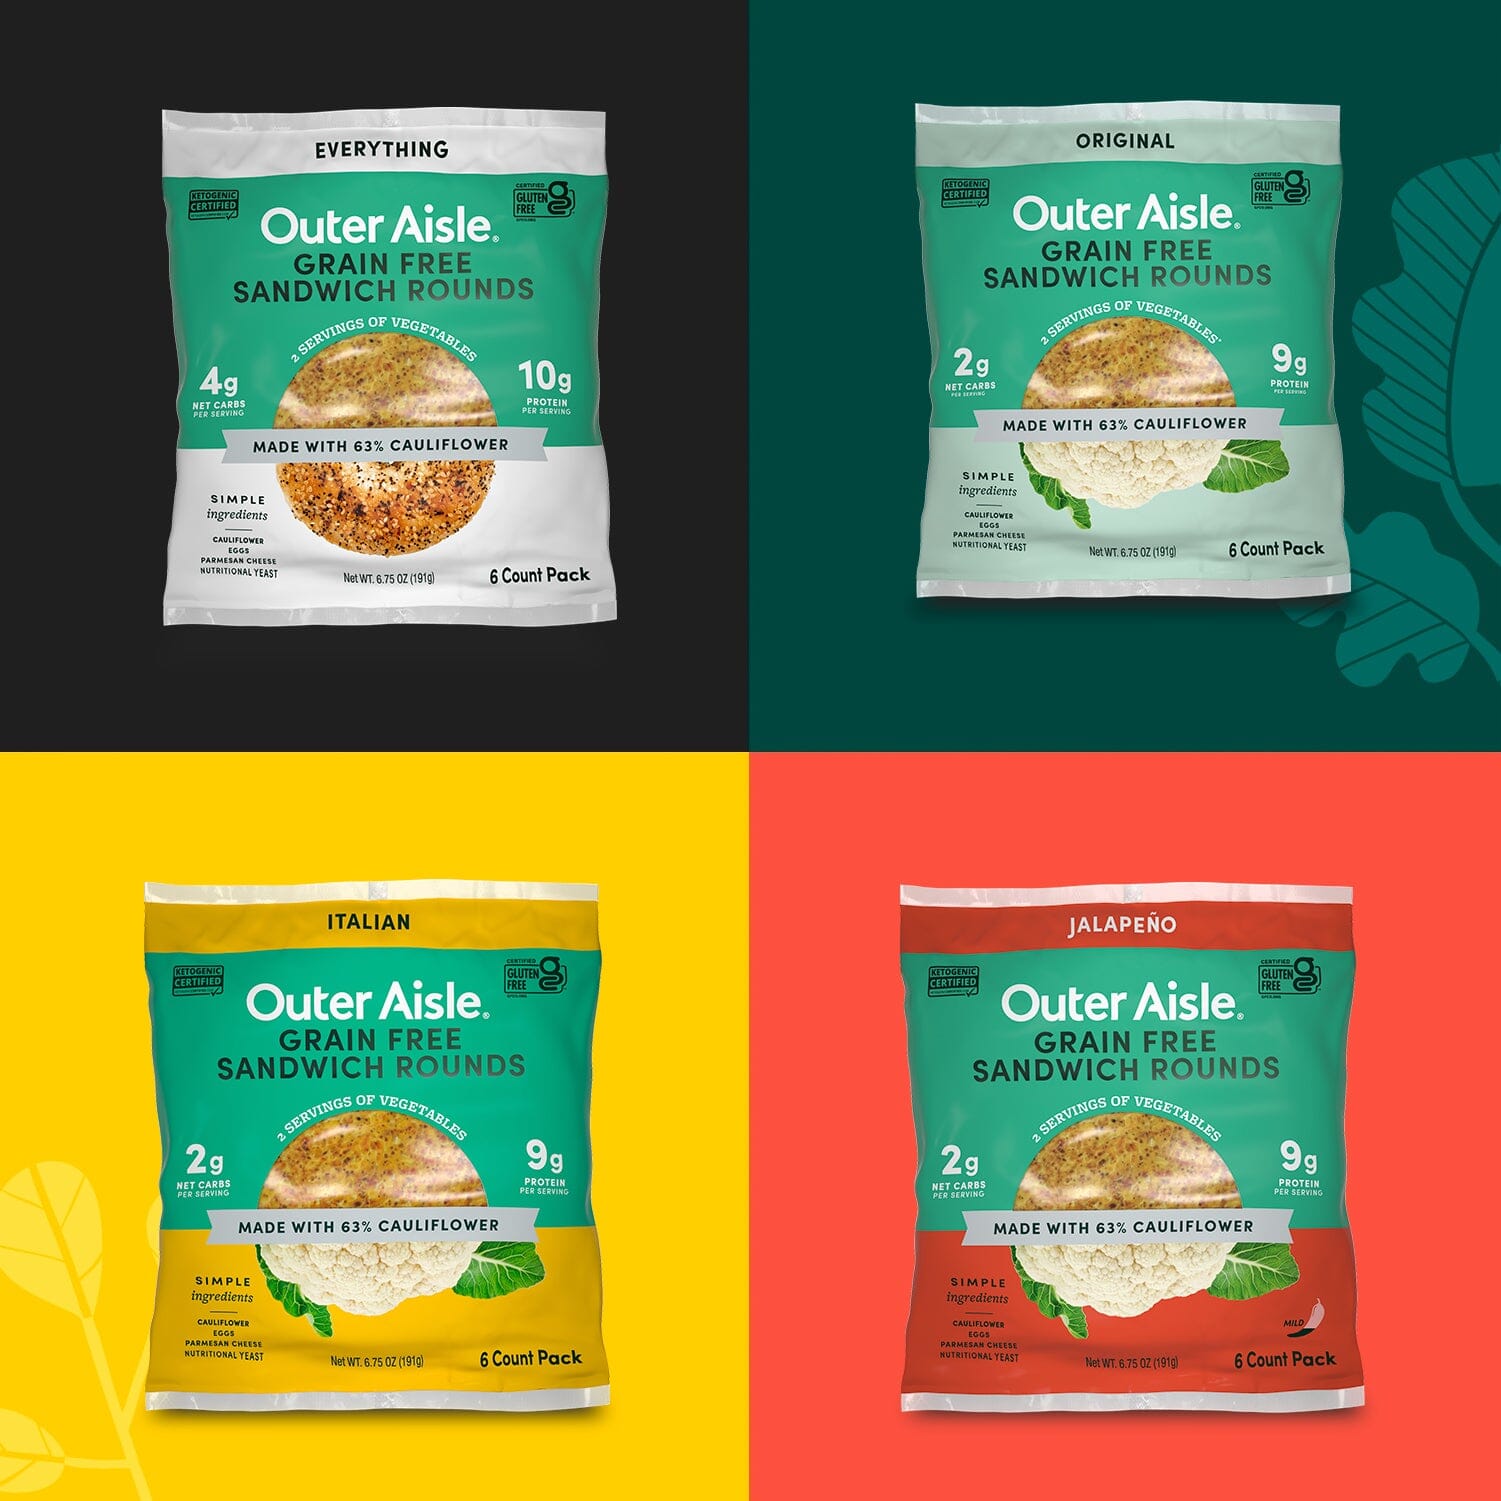 Outer Aisle Everything But the Carbs Cauliflower Sandwich Thins Review 